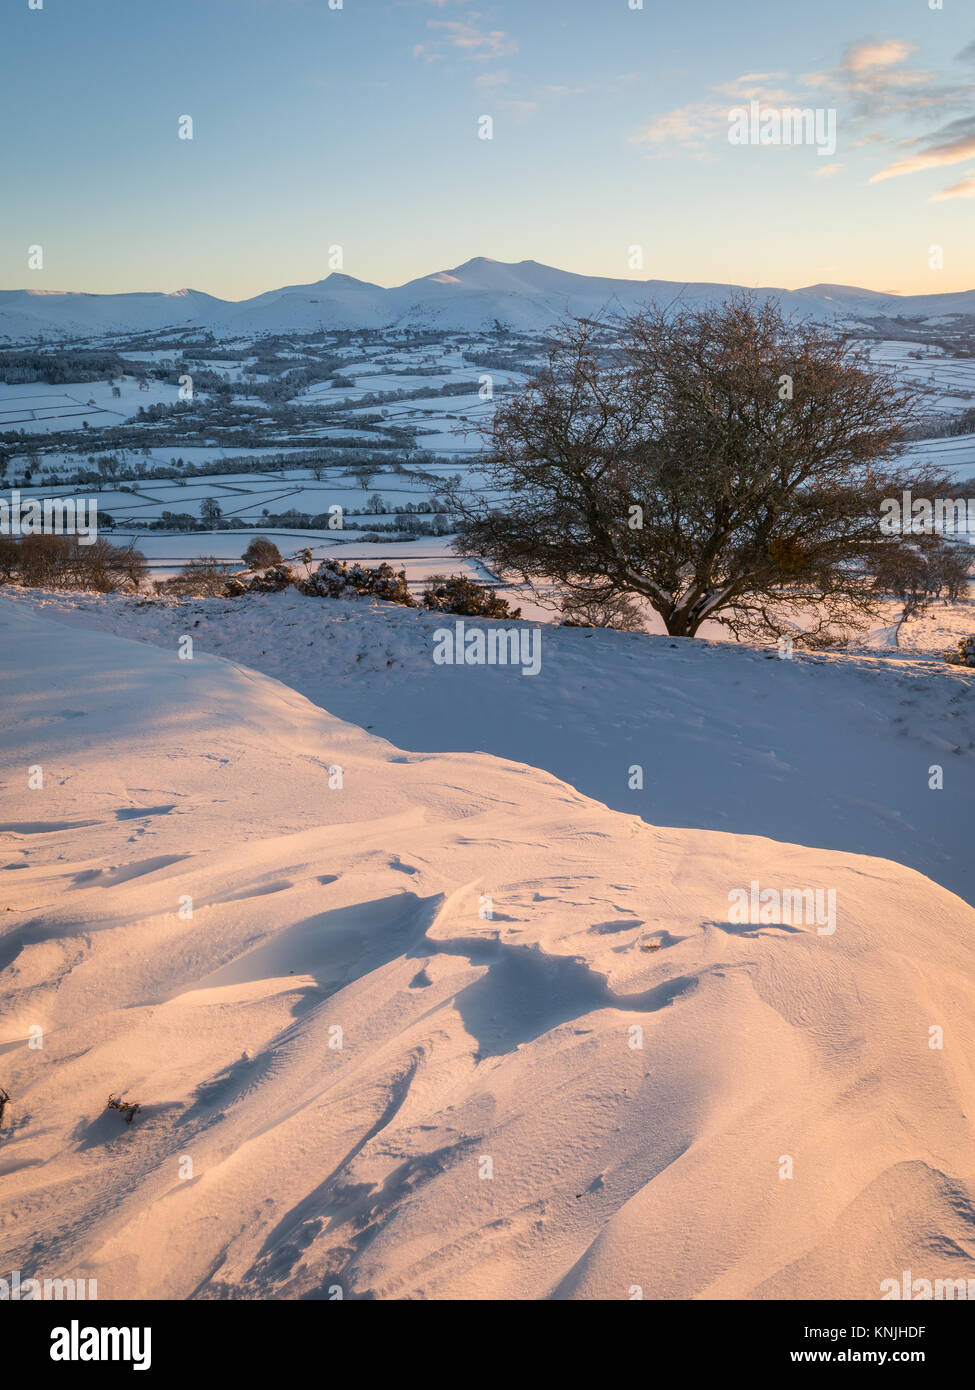 Paxton's Tower. UK. 11th December, 2017. Looking across a snow covered landsape at sunset, towards Pen y Fan mountain from Pen y Crug hill fort. Brecon Beacons National Park, Wales. Credit: Drew Buckley/Alamy Live News Stock Photo